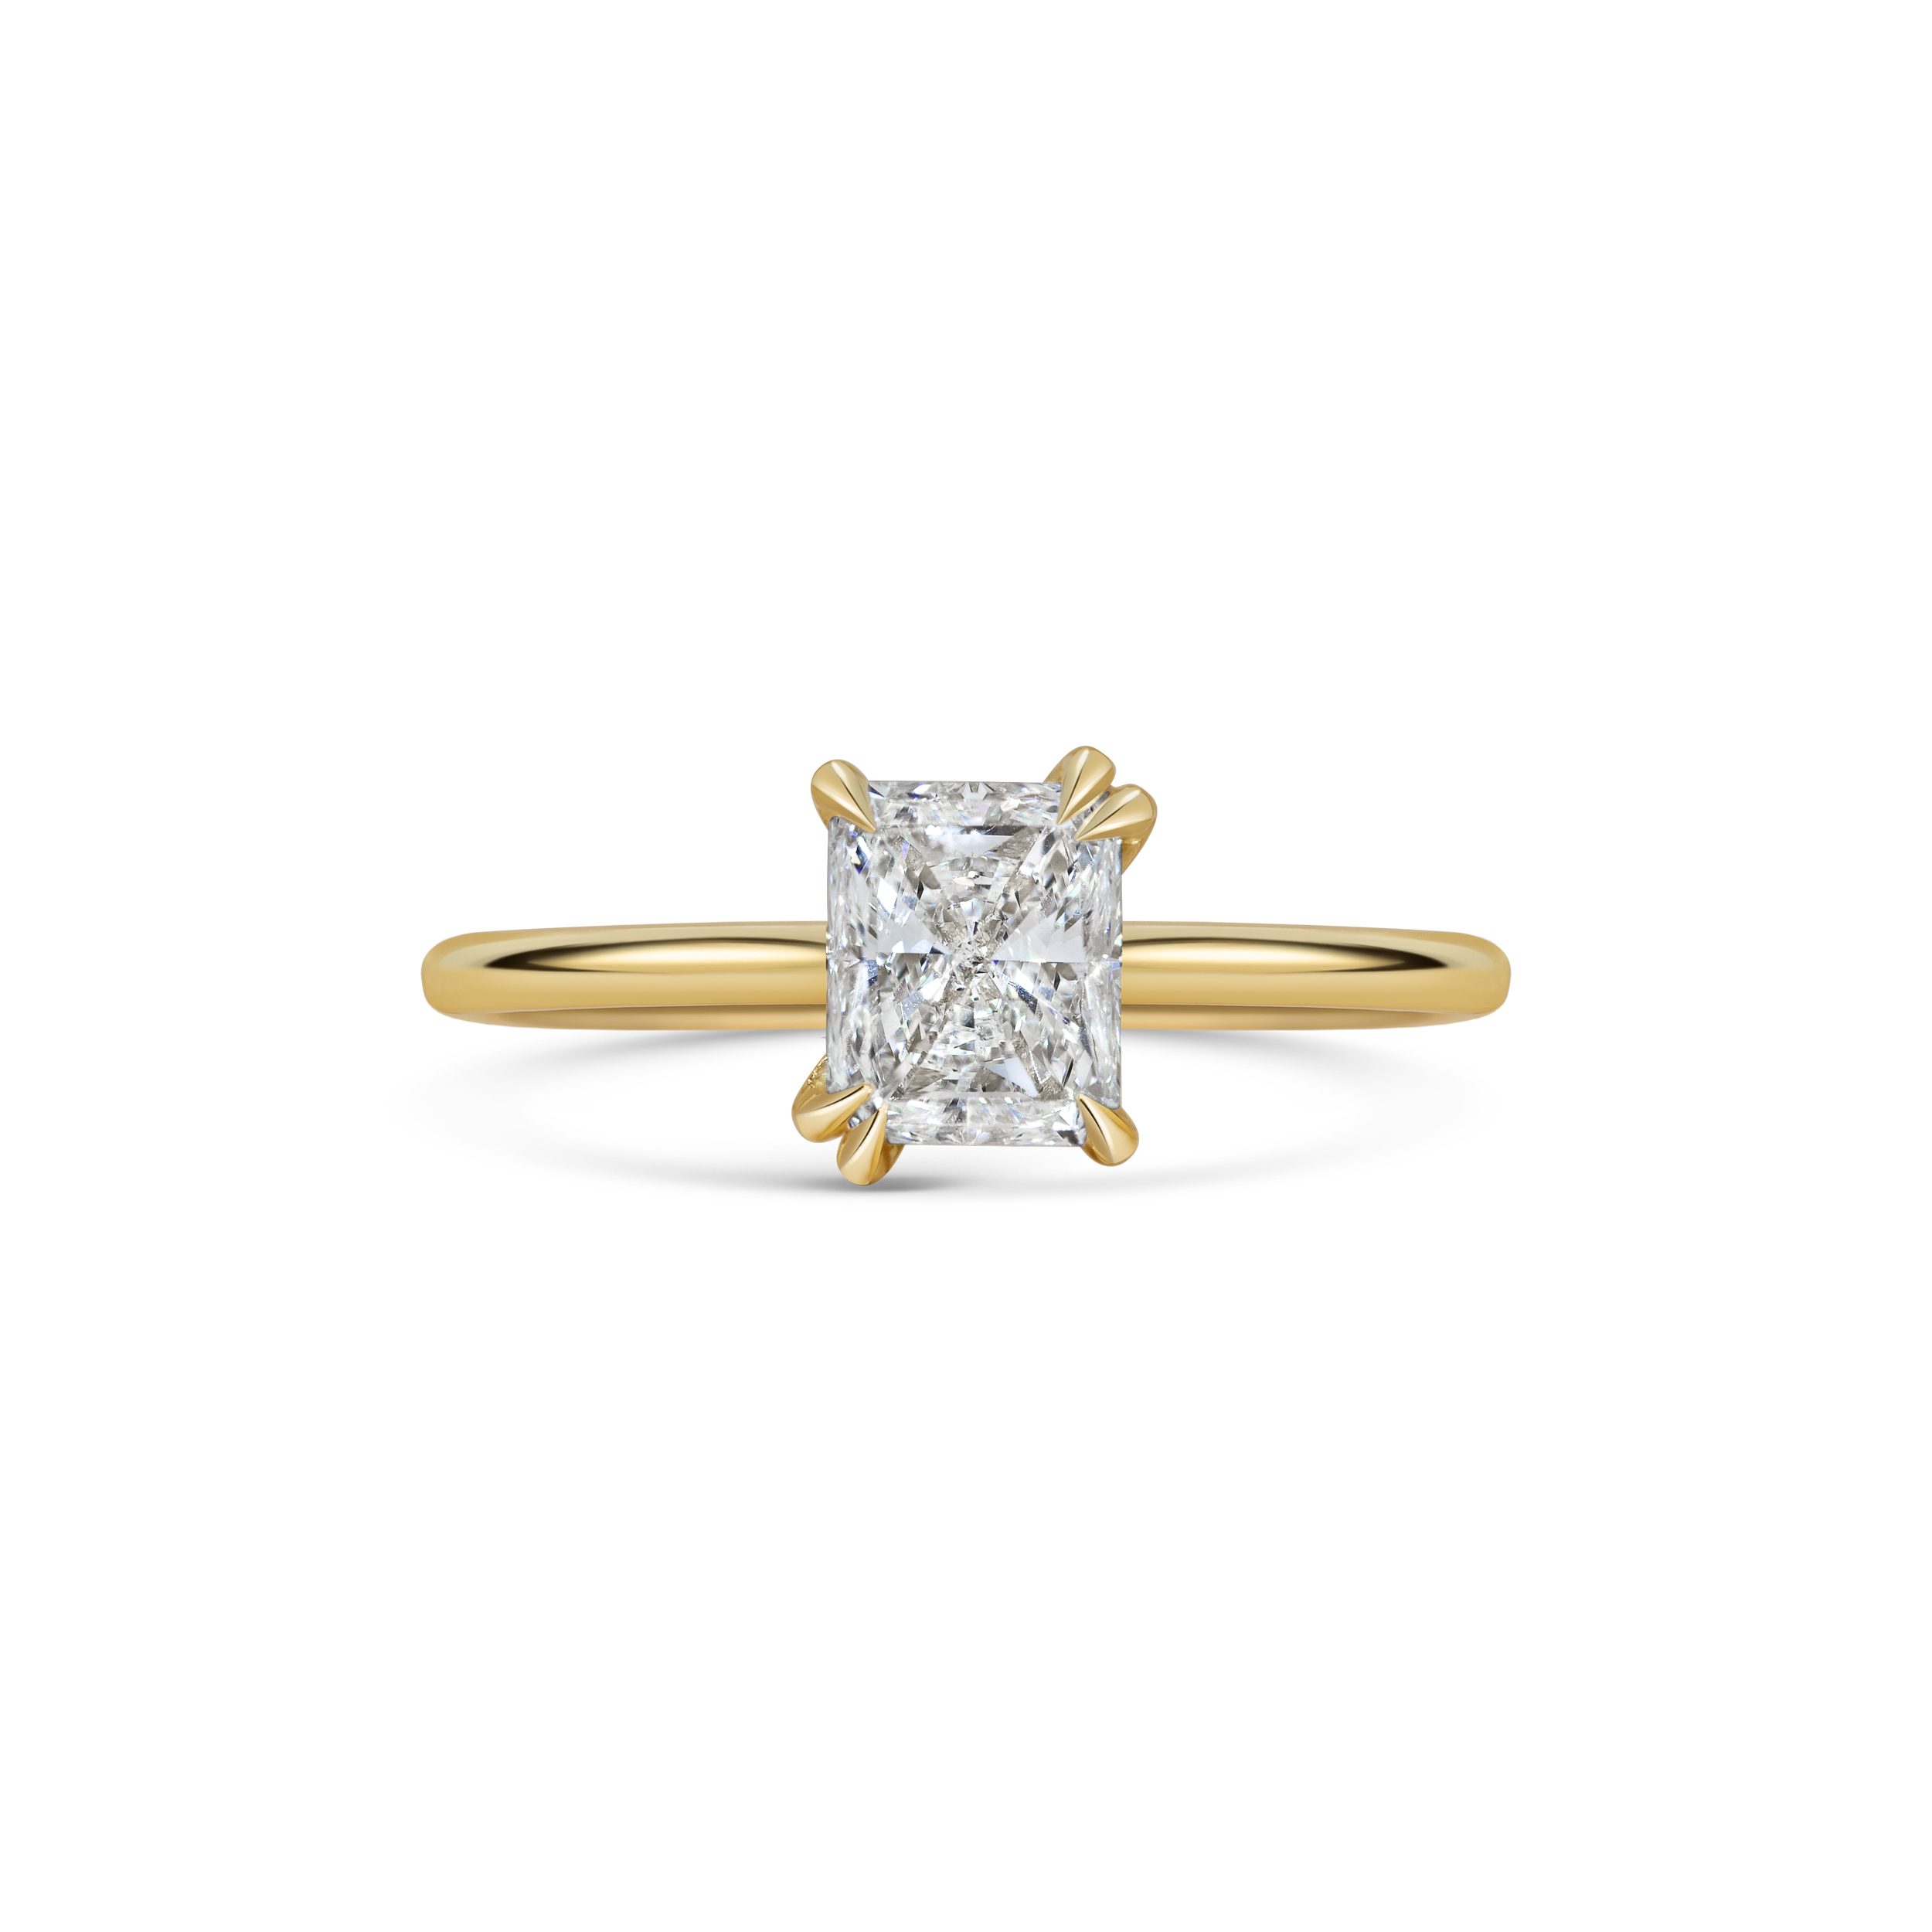 Ready-to-ship engagement rings — Michelle Oh Jewellery